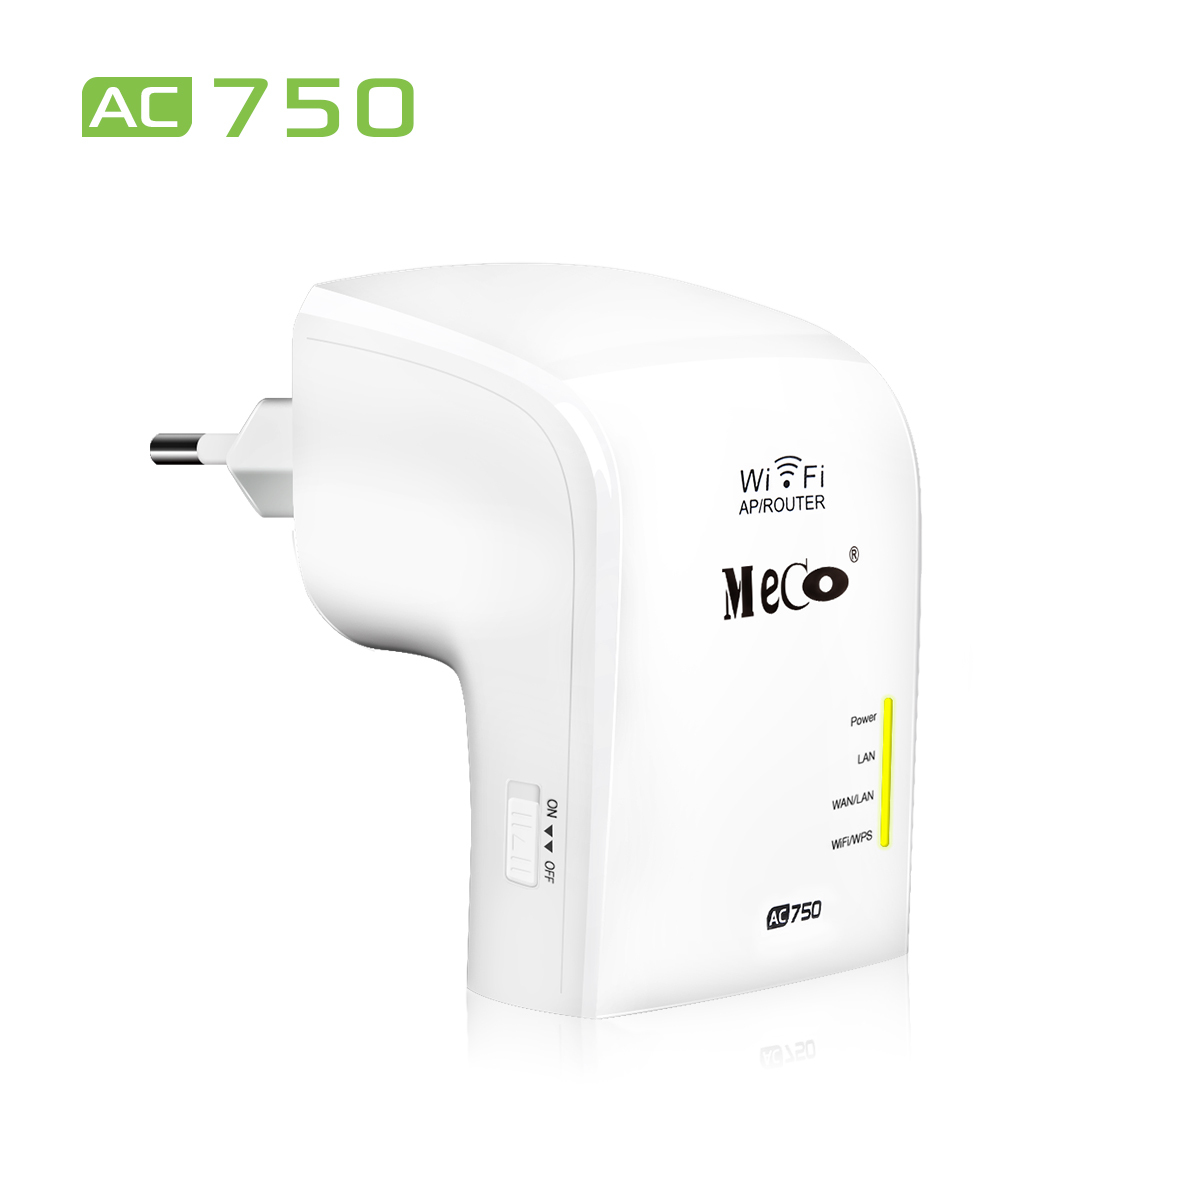 MECO-AC750-24GHz-5GHz-Dual-Band-750Mbps-Wireless-WiFi-Range-Extender-Repeater-Router-AP-EU-Plug-1401577